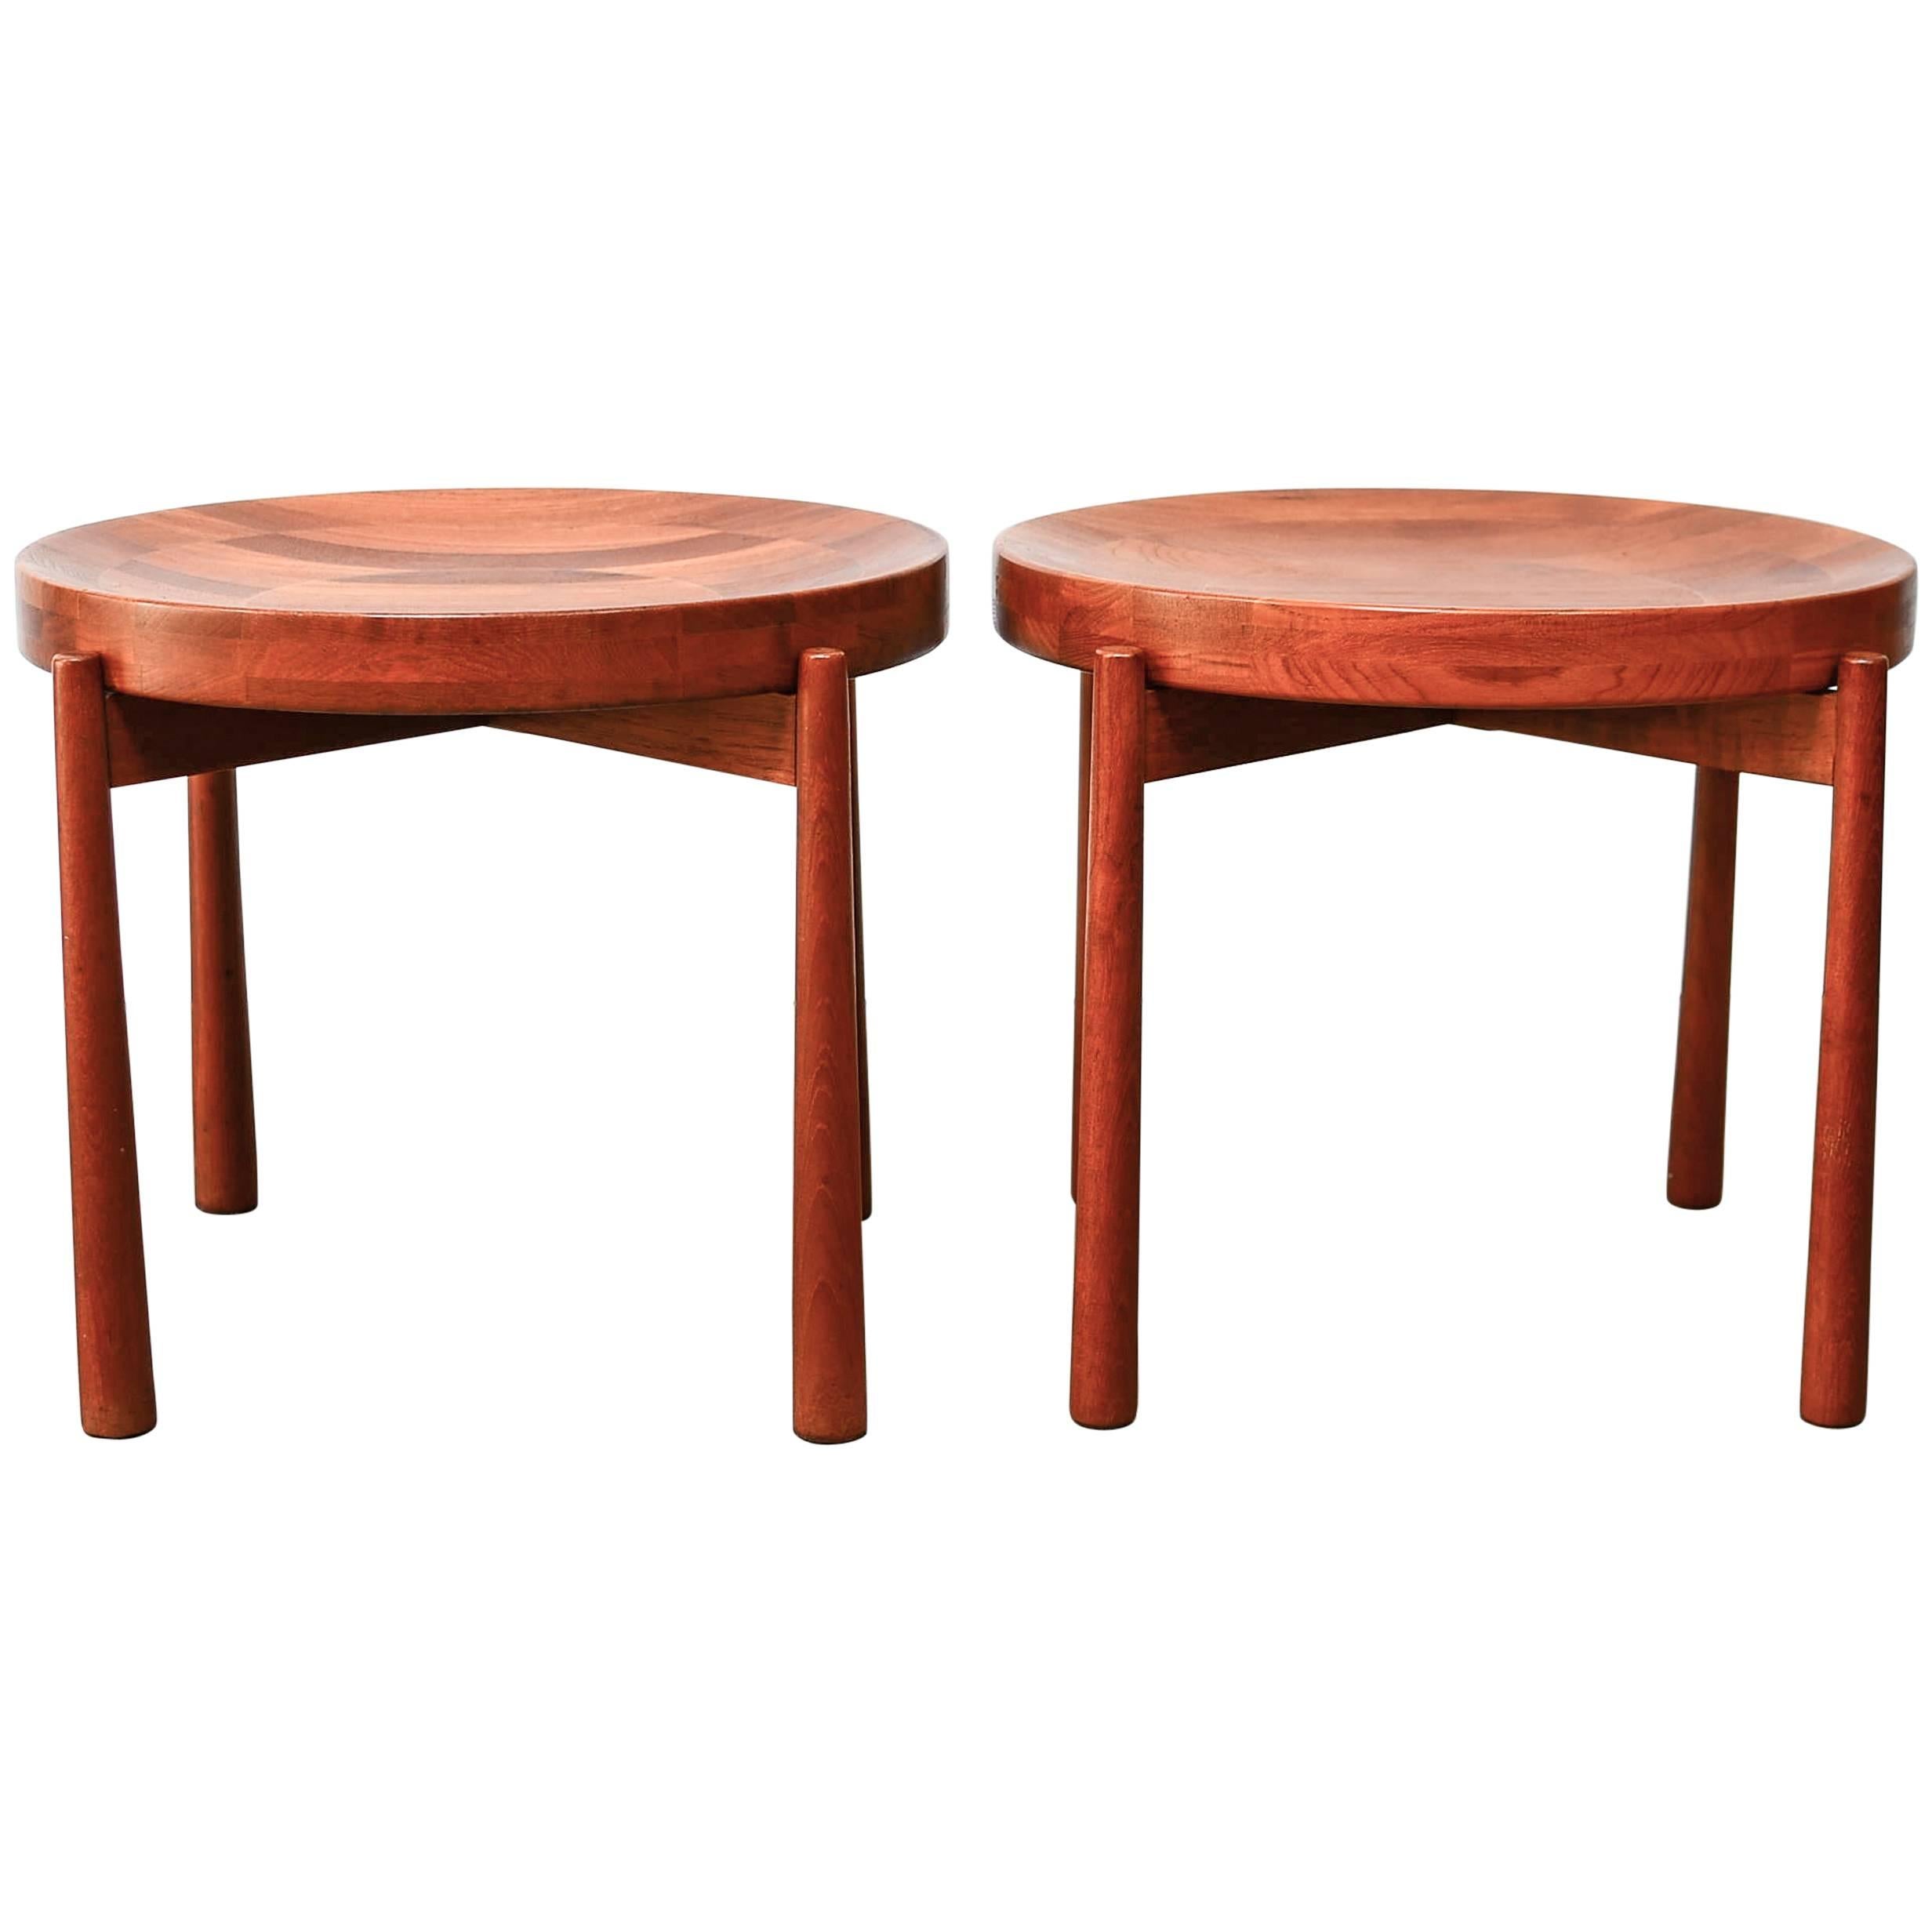 Solid Teak Side Tables in the style of Jens Quistgaard for Dux For Sale